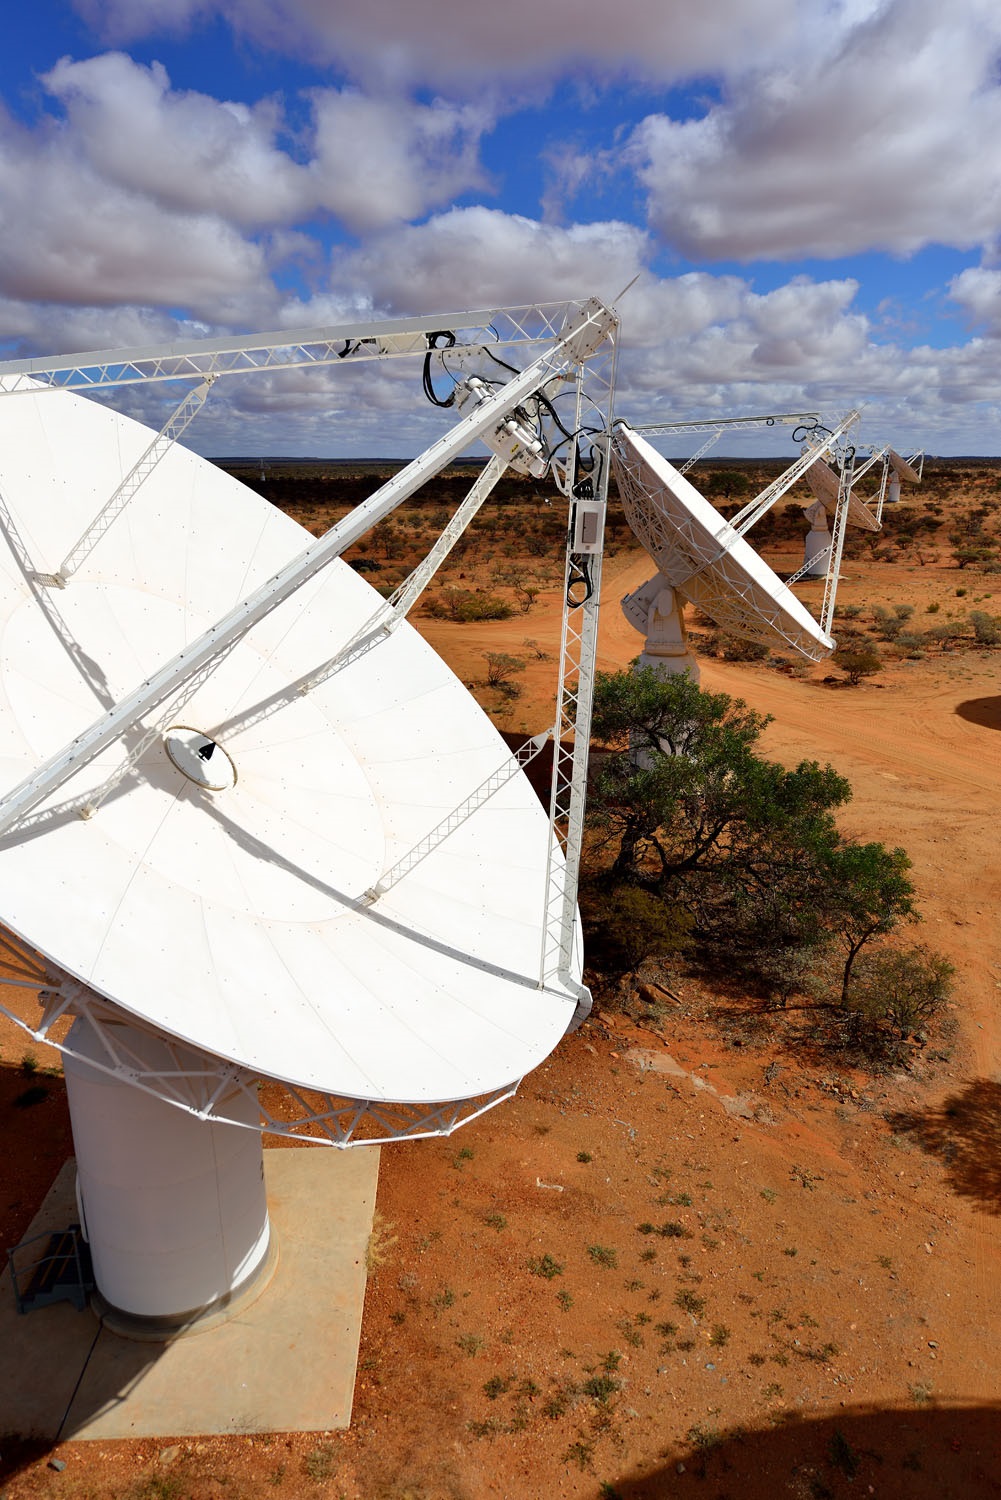 ASKAP will capture radio images of the sky in more detail and faster than ever before.